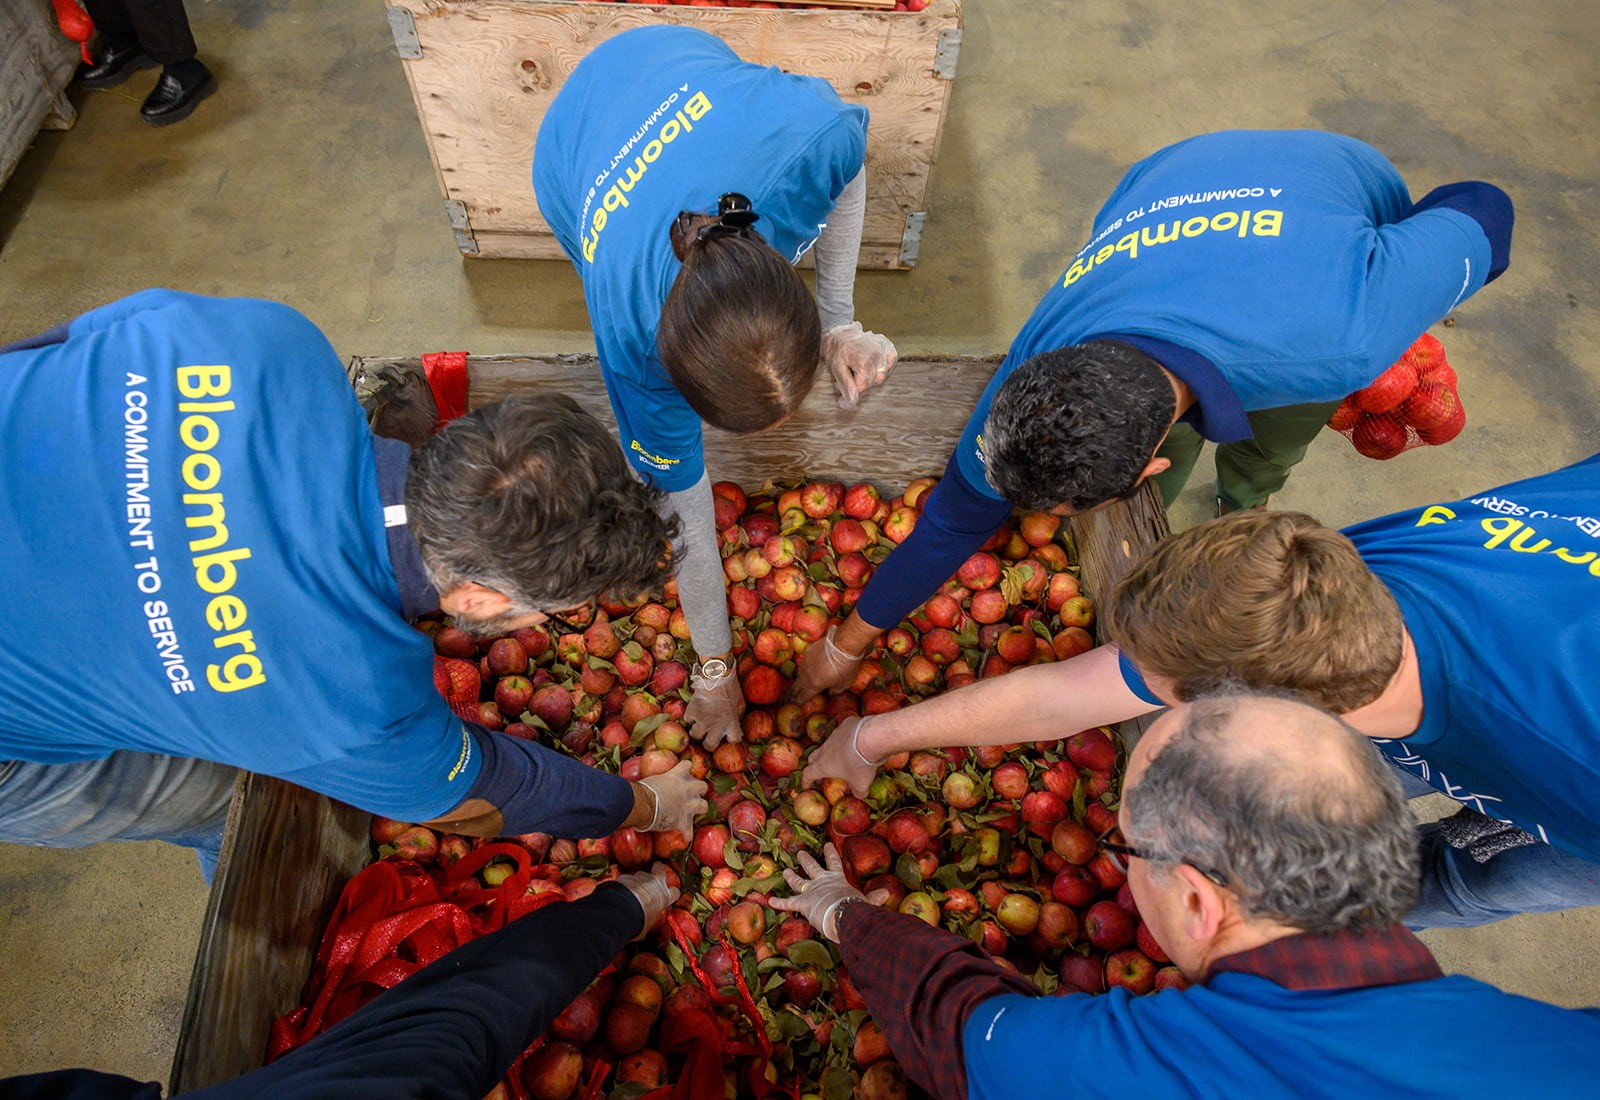 Bloomberg Employees reaching into a barrel of apples as they volunteer with City Harvest in New York.